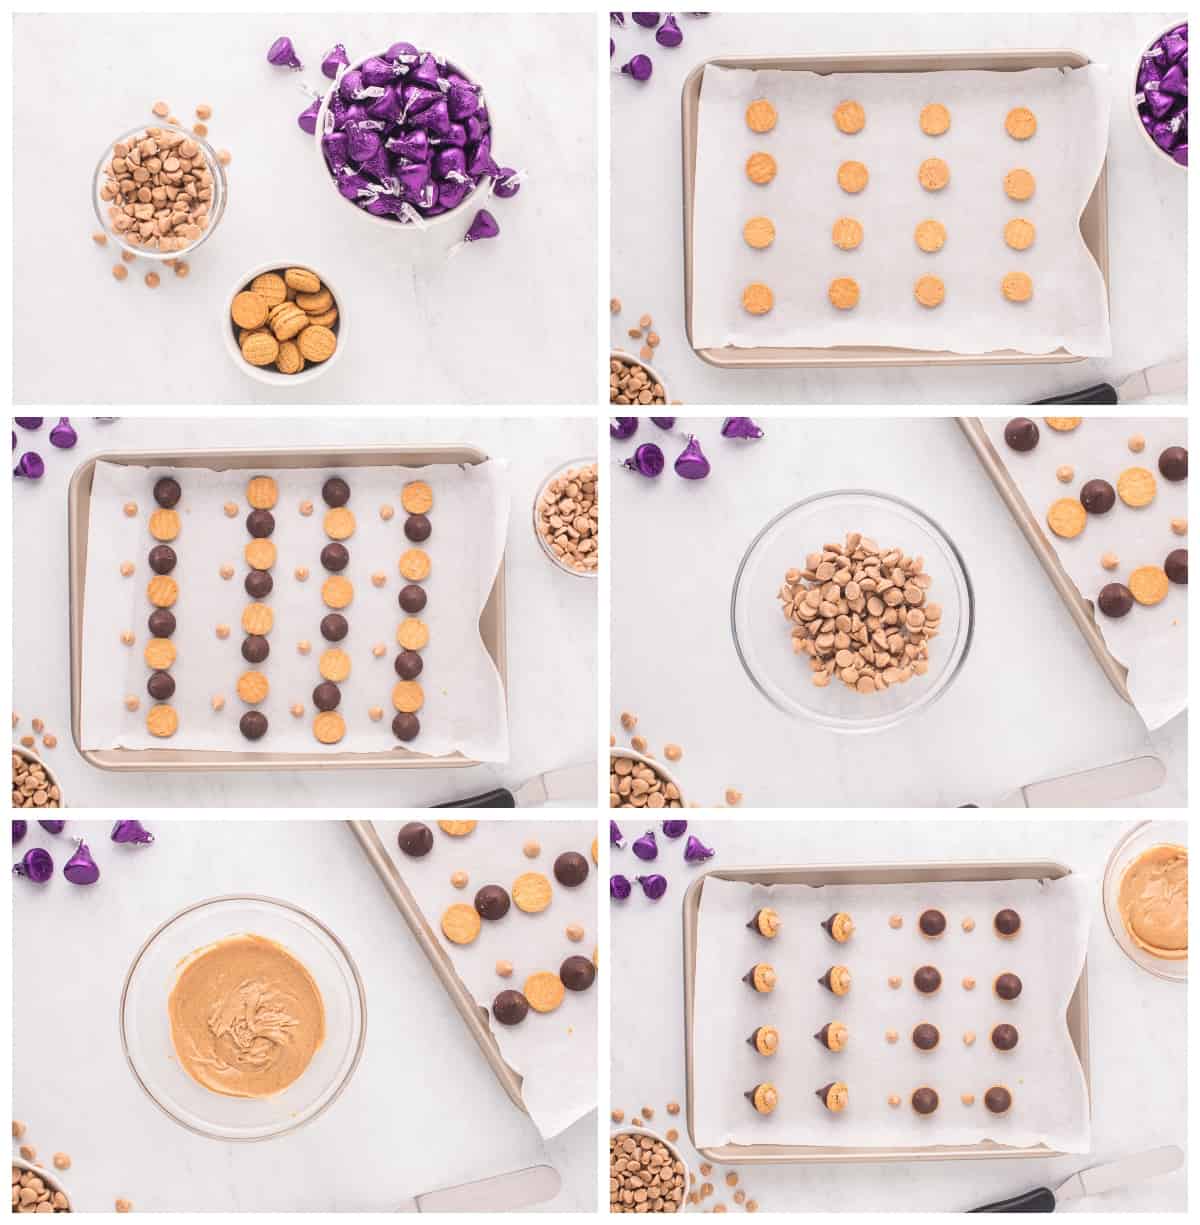 how to make acorn cookies step by step photo instructions